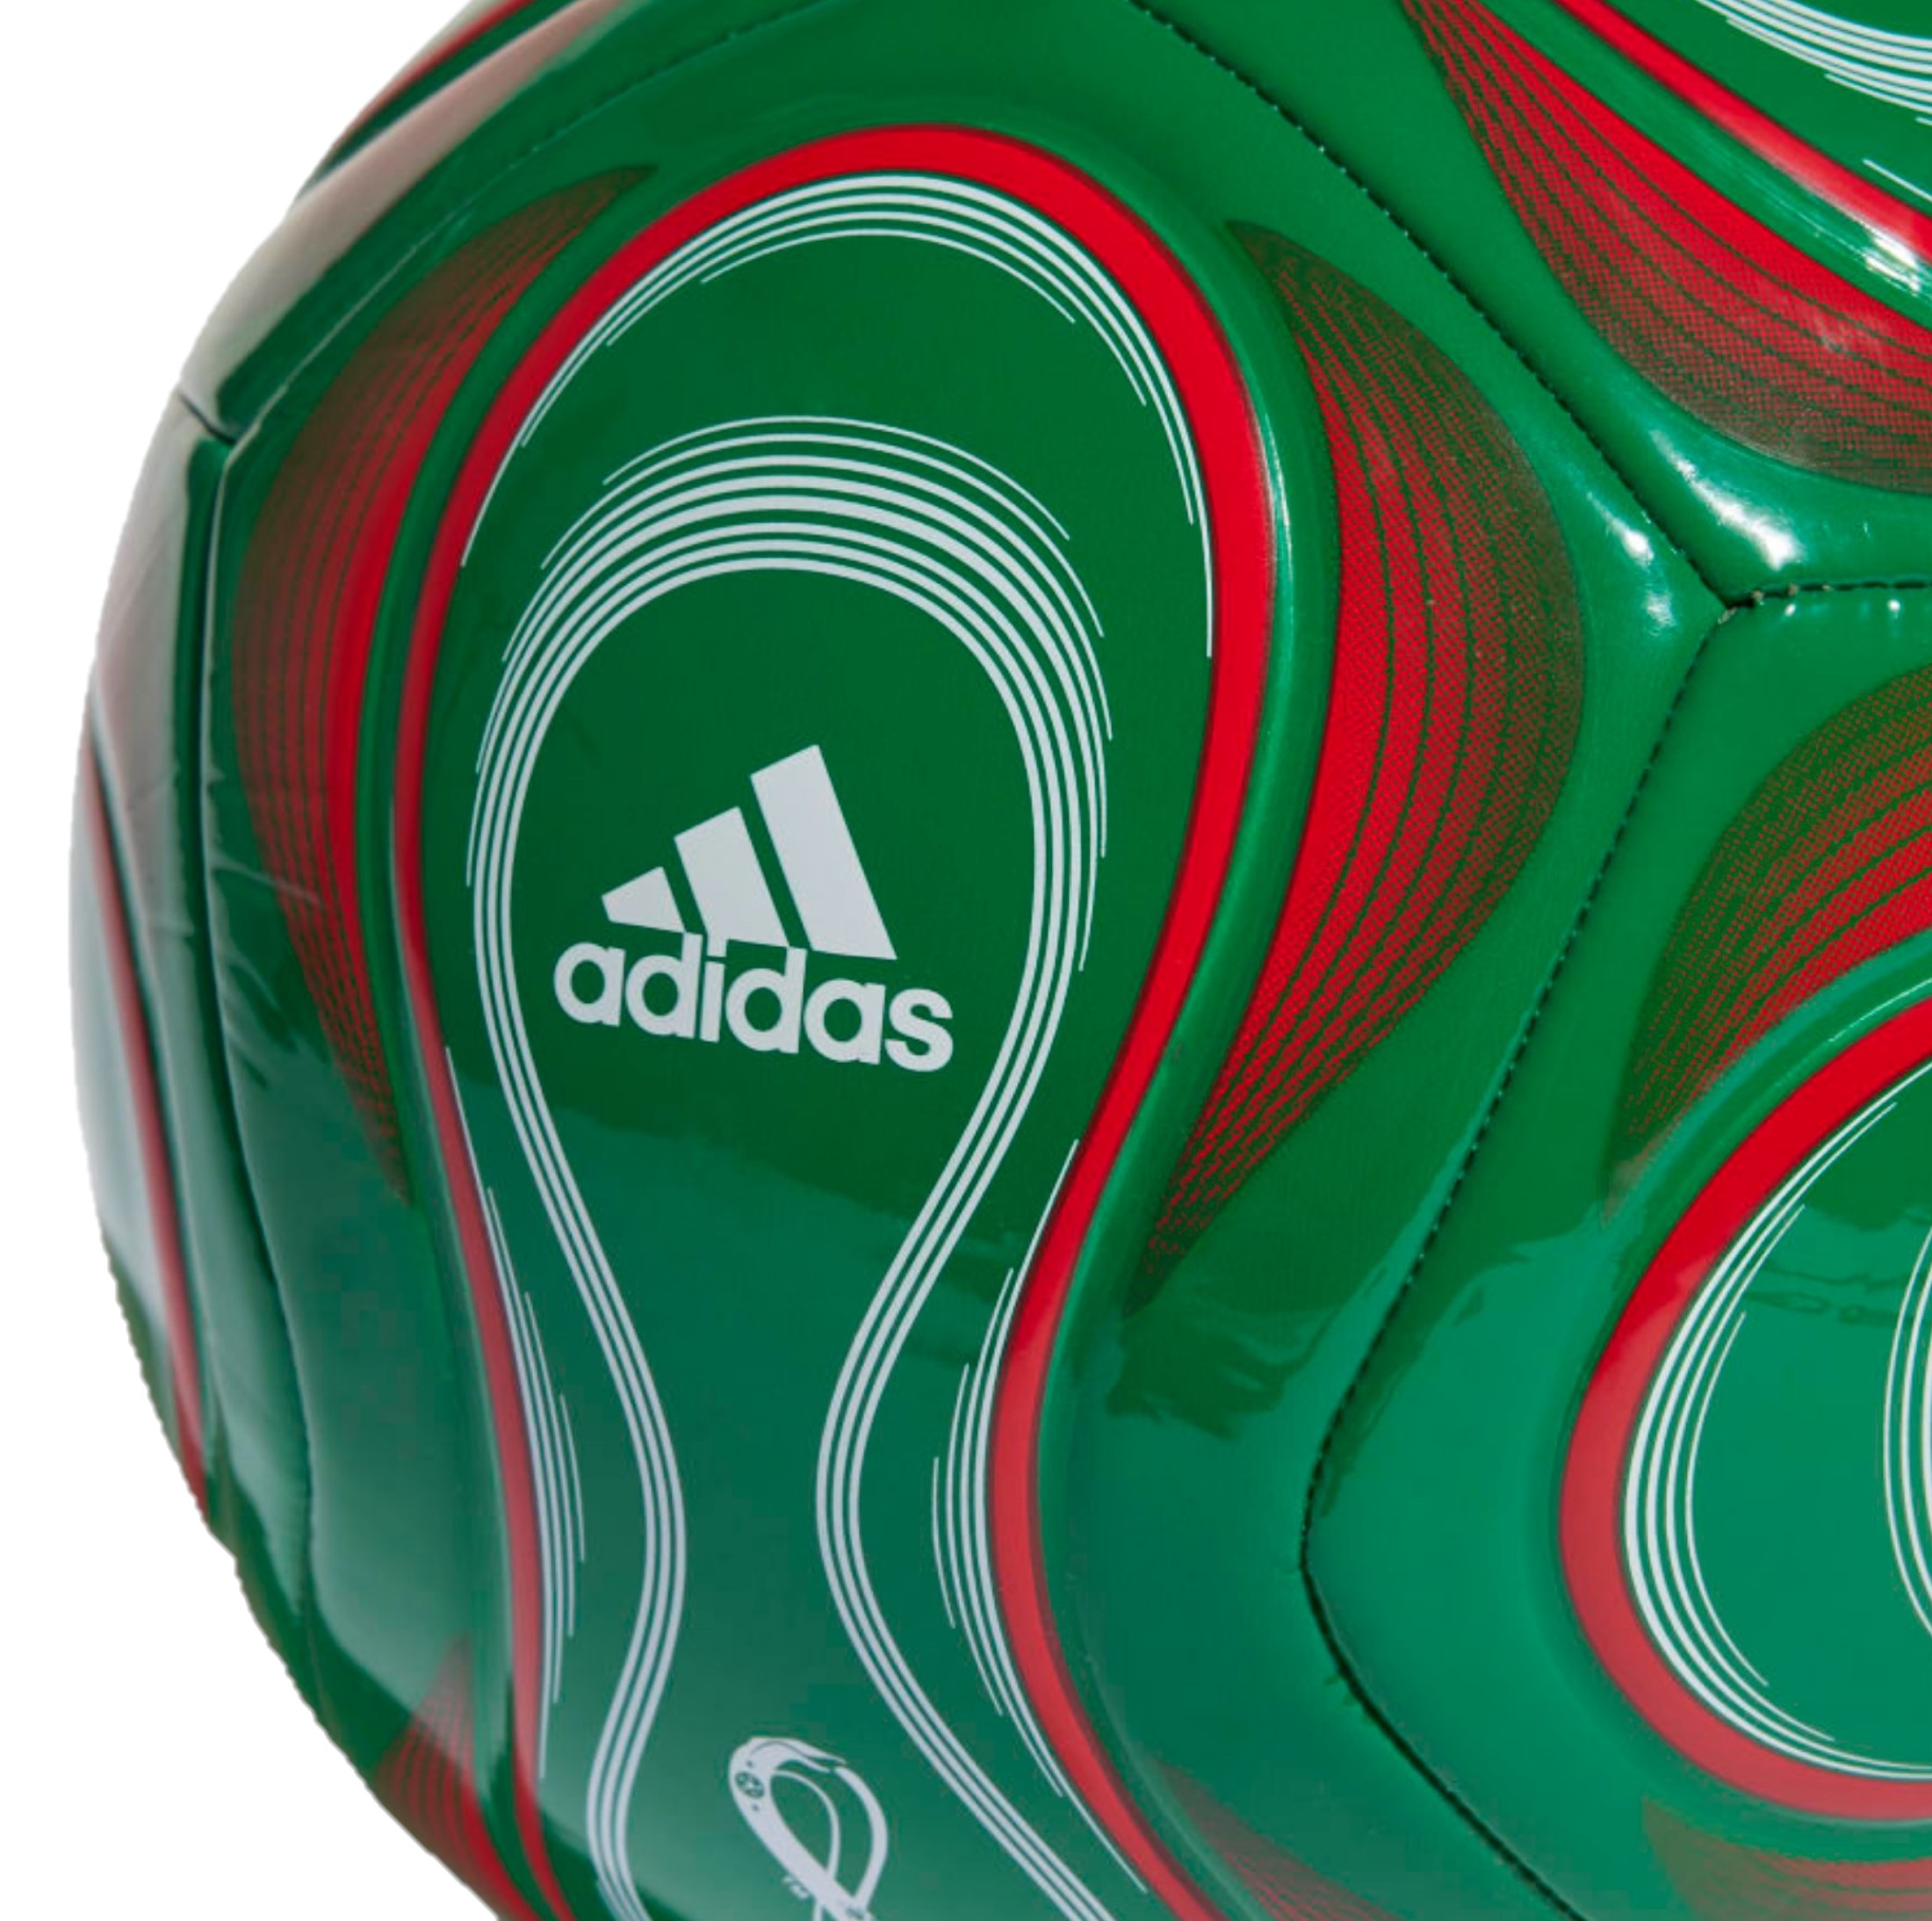 Adidas Mexico Club Soccer Ball-Size 5 - image 3 of 3